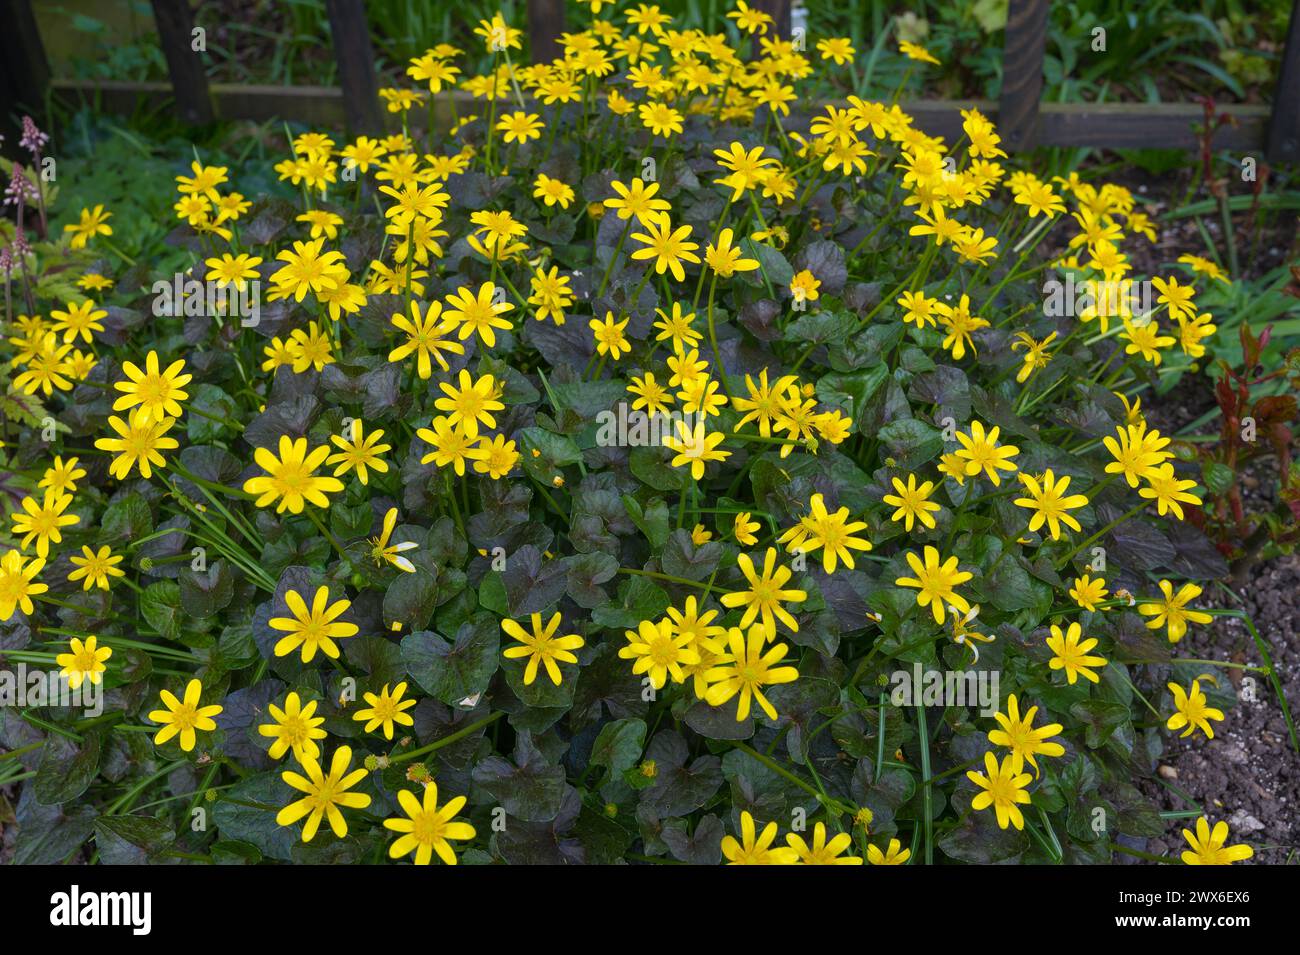 Clump of flowering lesser celandine Ficaria verna a native spring flowering herbaceous perennial in the buttercup family in English suburban garden UK Stock Photo